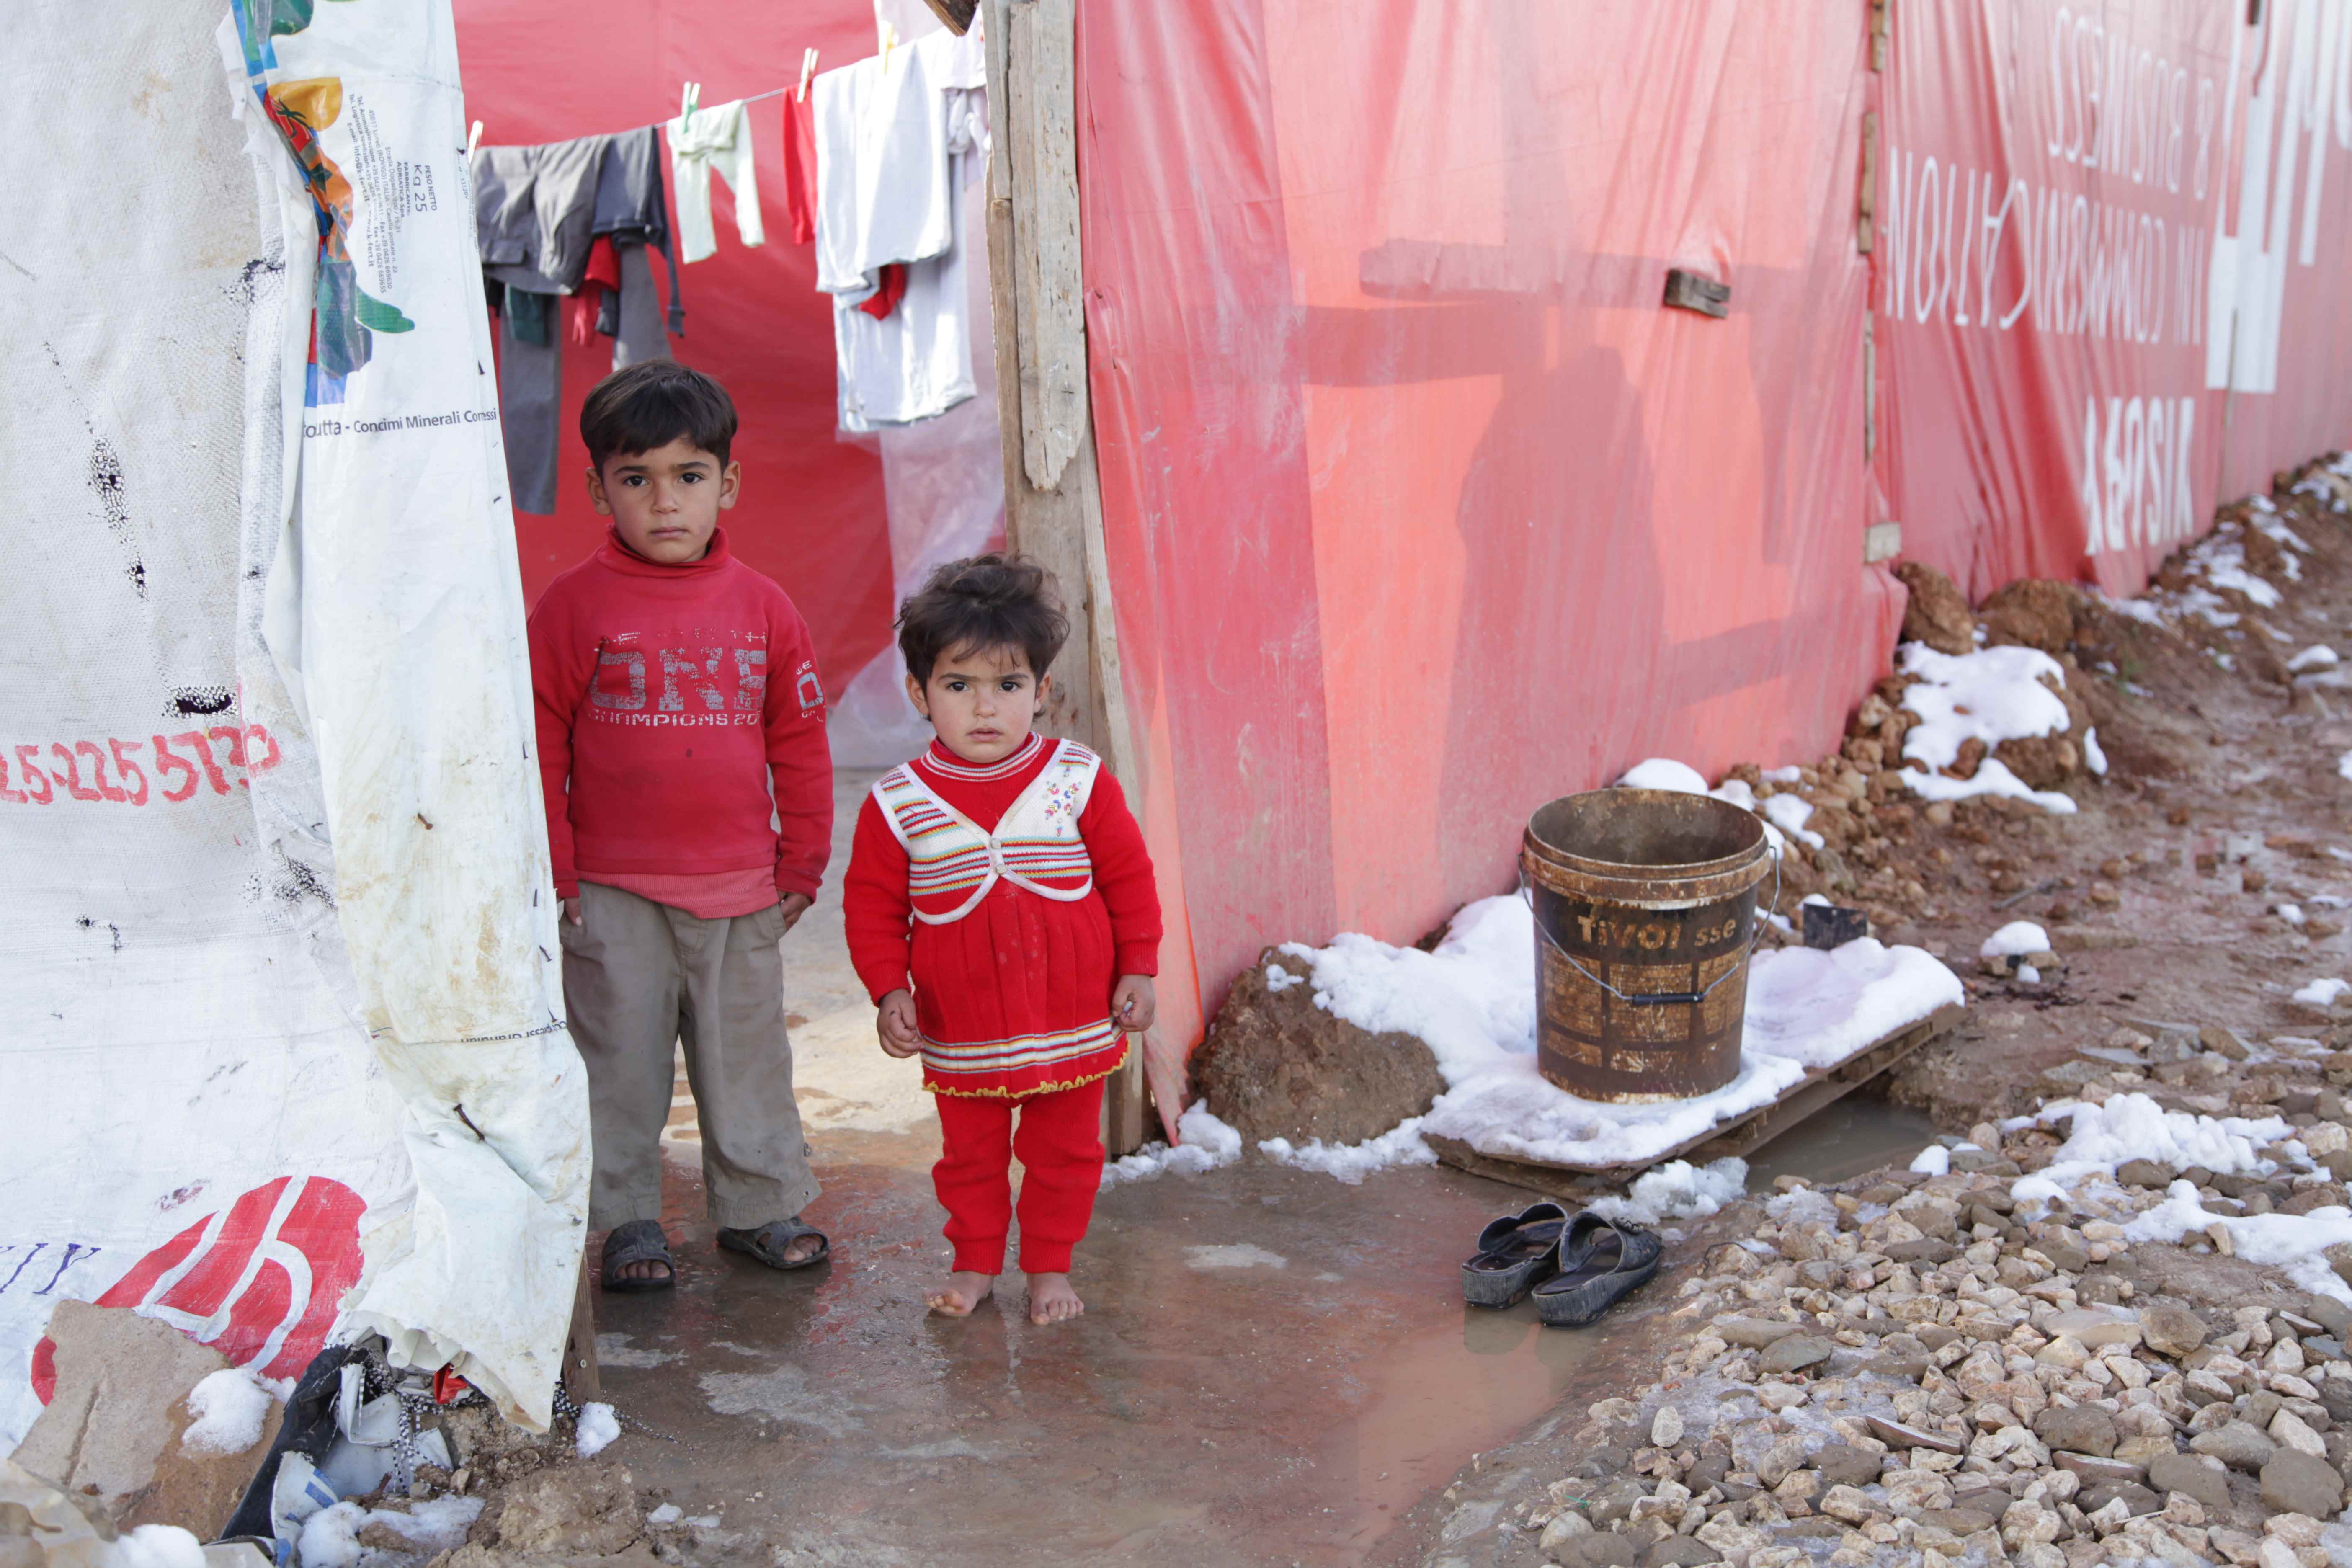 Two Syrian children in front on tarpaulin tents in a flooded muddy refugee camp looking to the camera